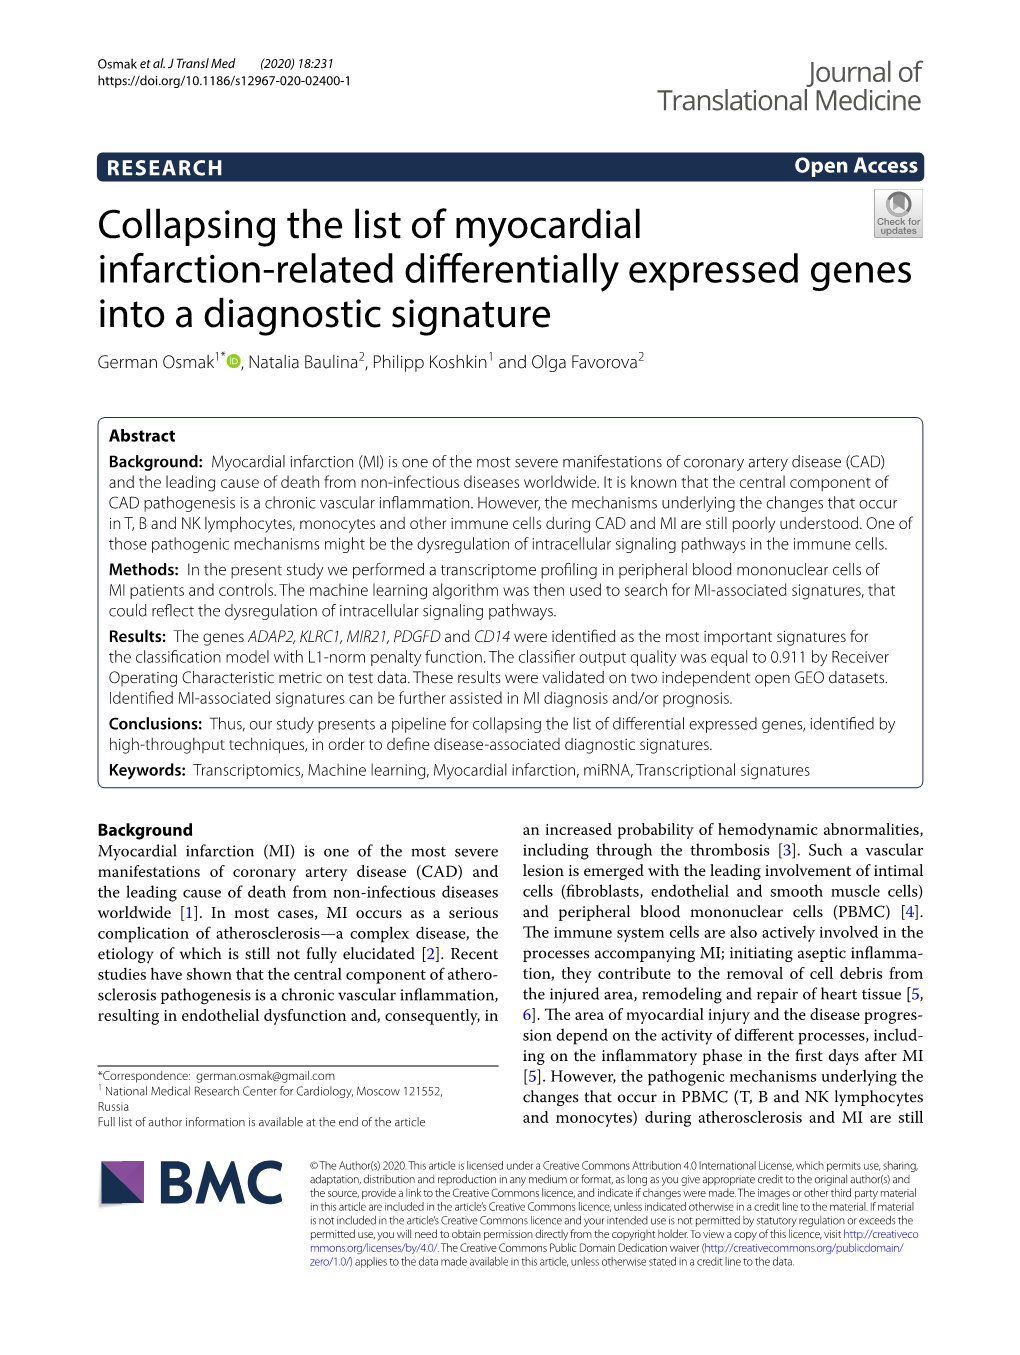 Collapsing the List of Myocardial Infarction-Related Differentially Expressed Genes Into a Diagnostic Signature